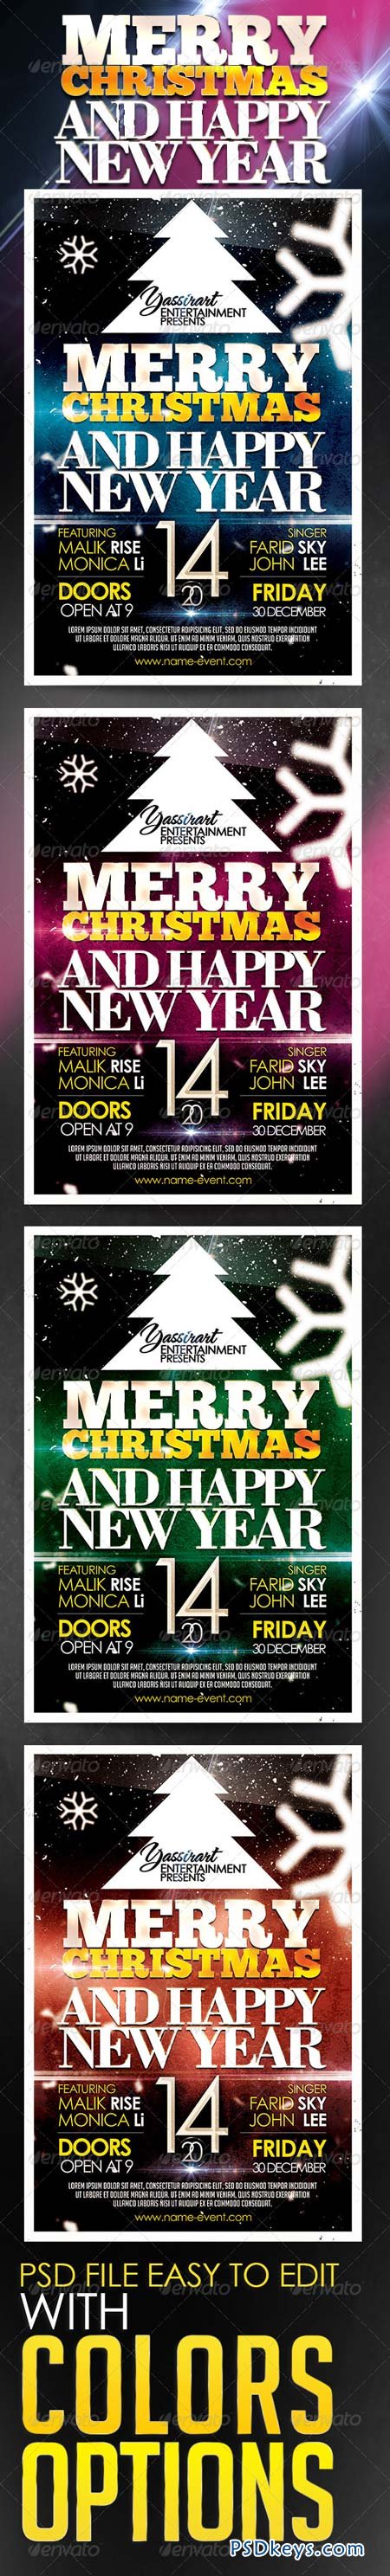 Marry Christmas Party Flyer Template 5780408